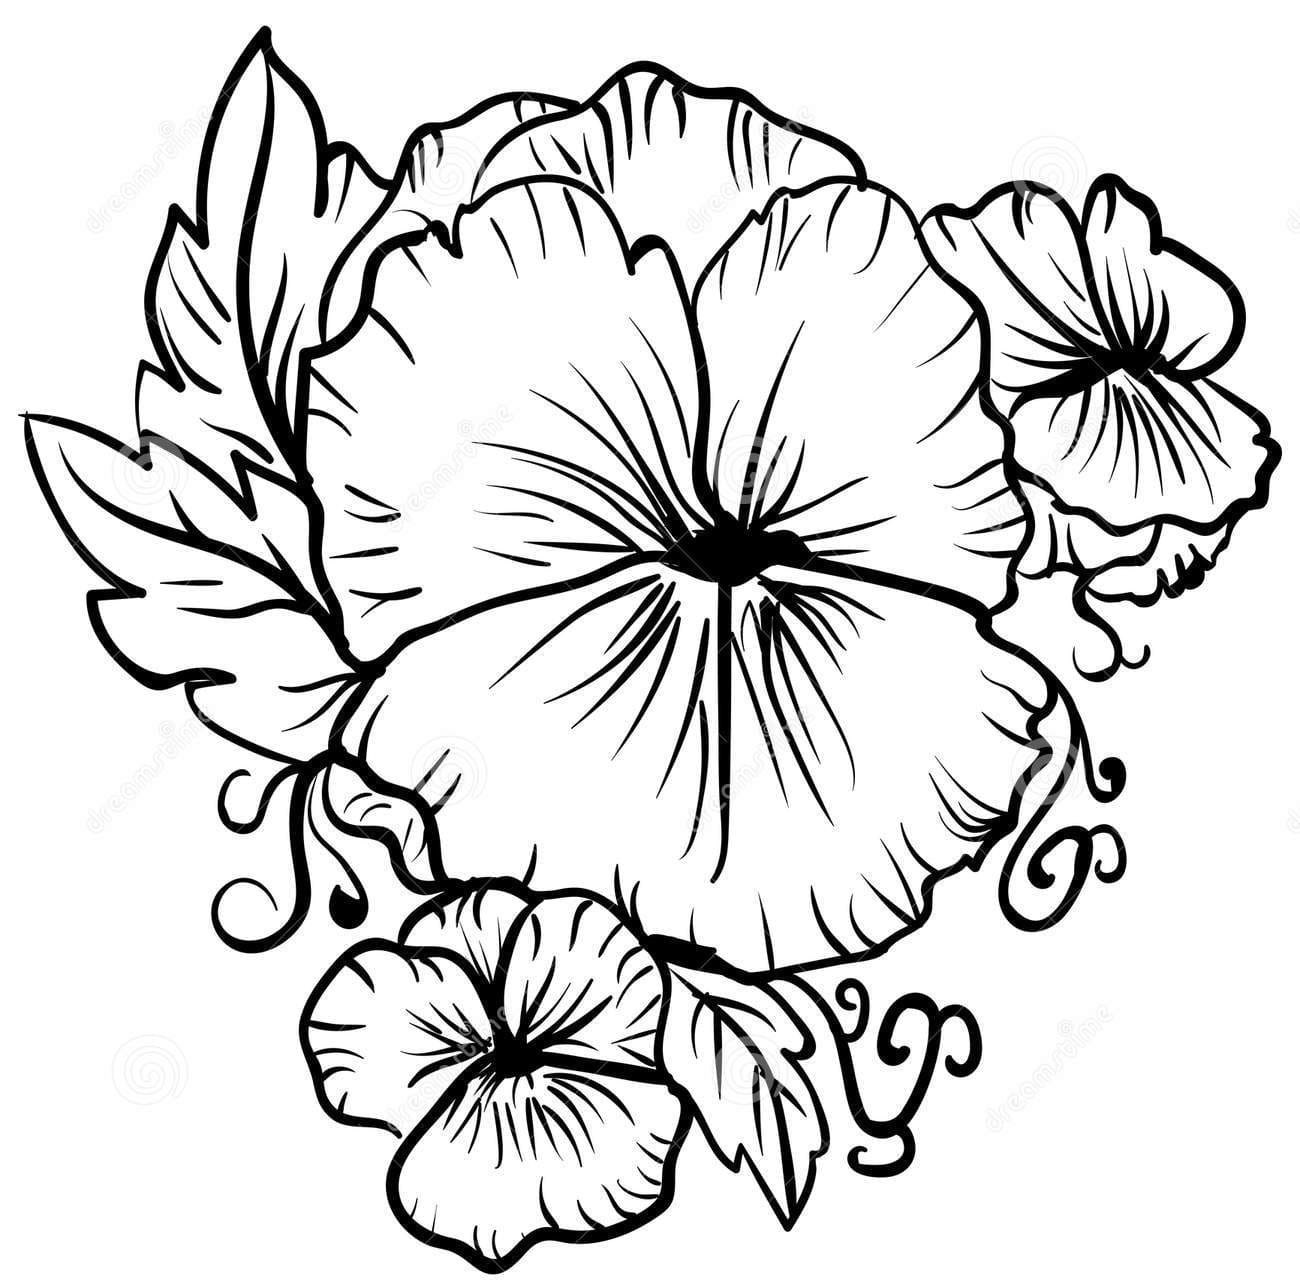 Pansy Sketch Black and White Coloring Page